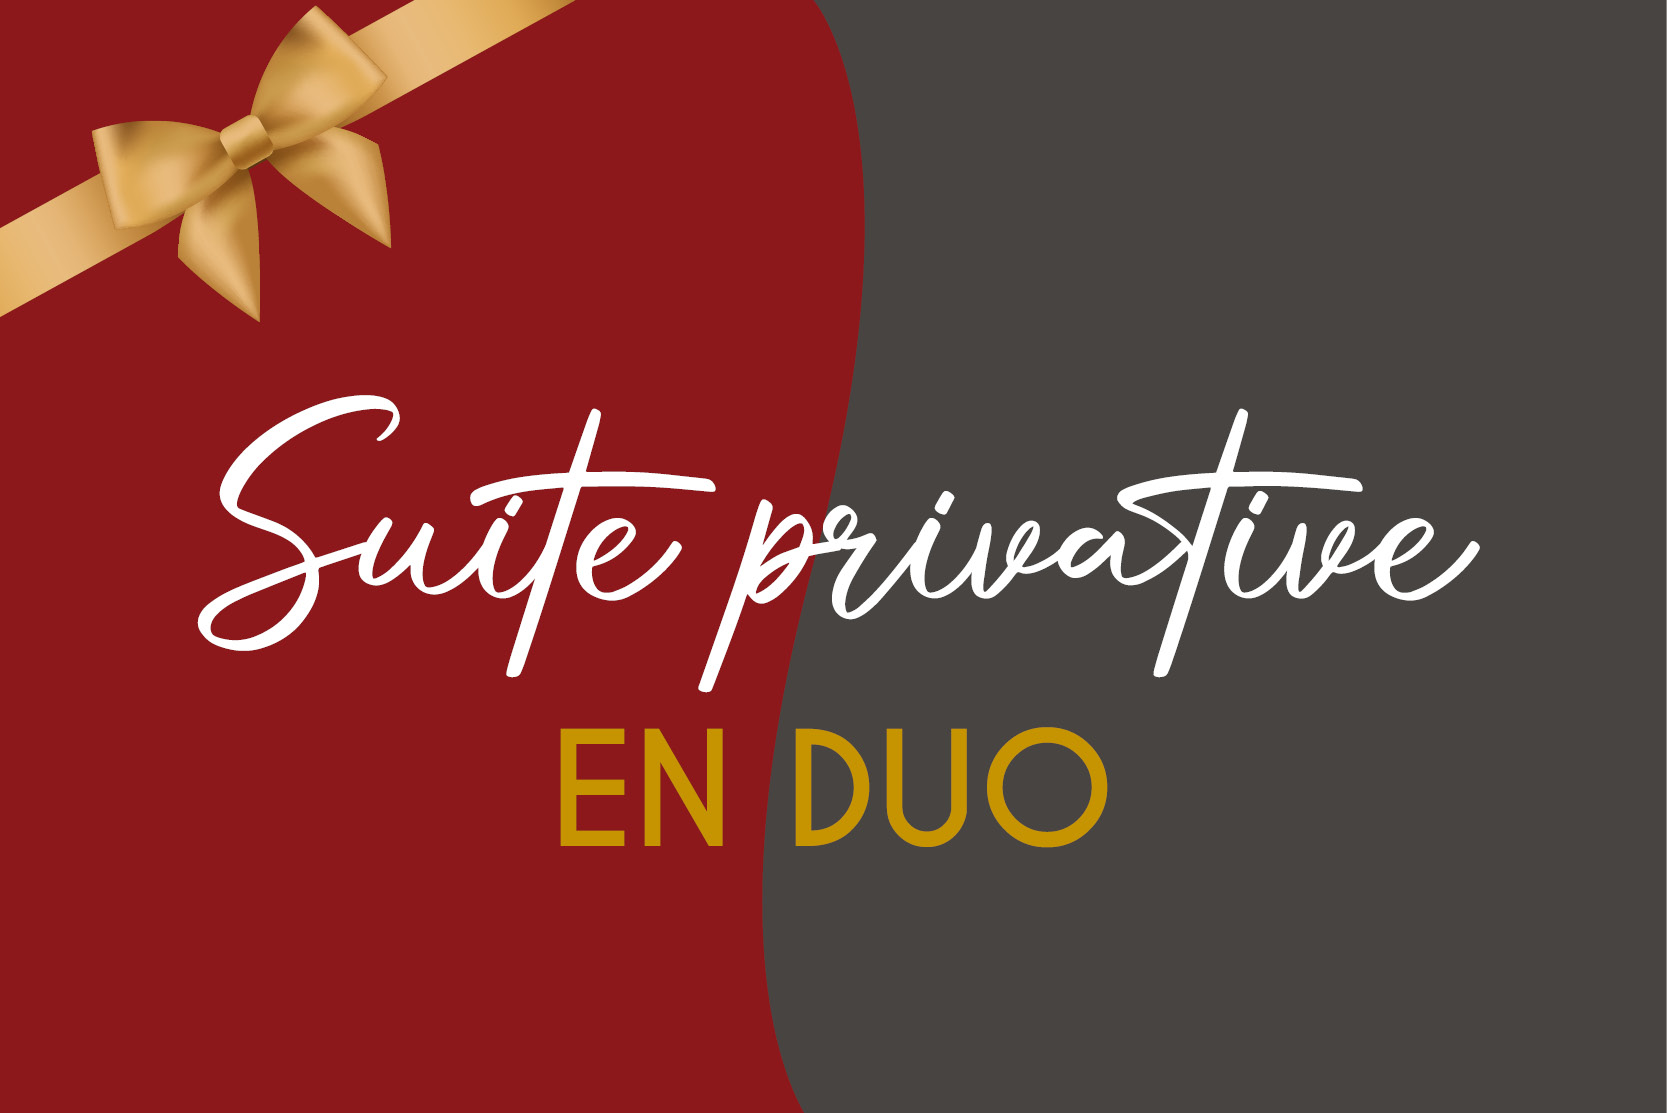 SOINS DUO SUITE PRIVATIVE